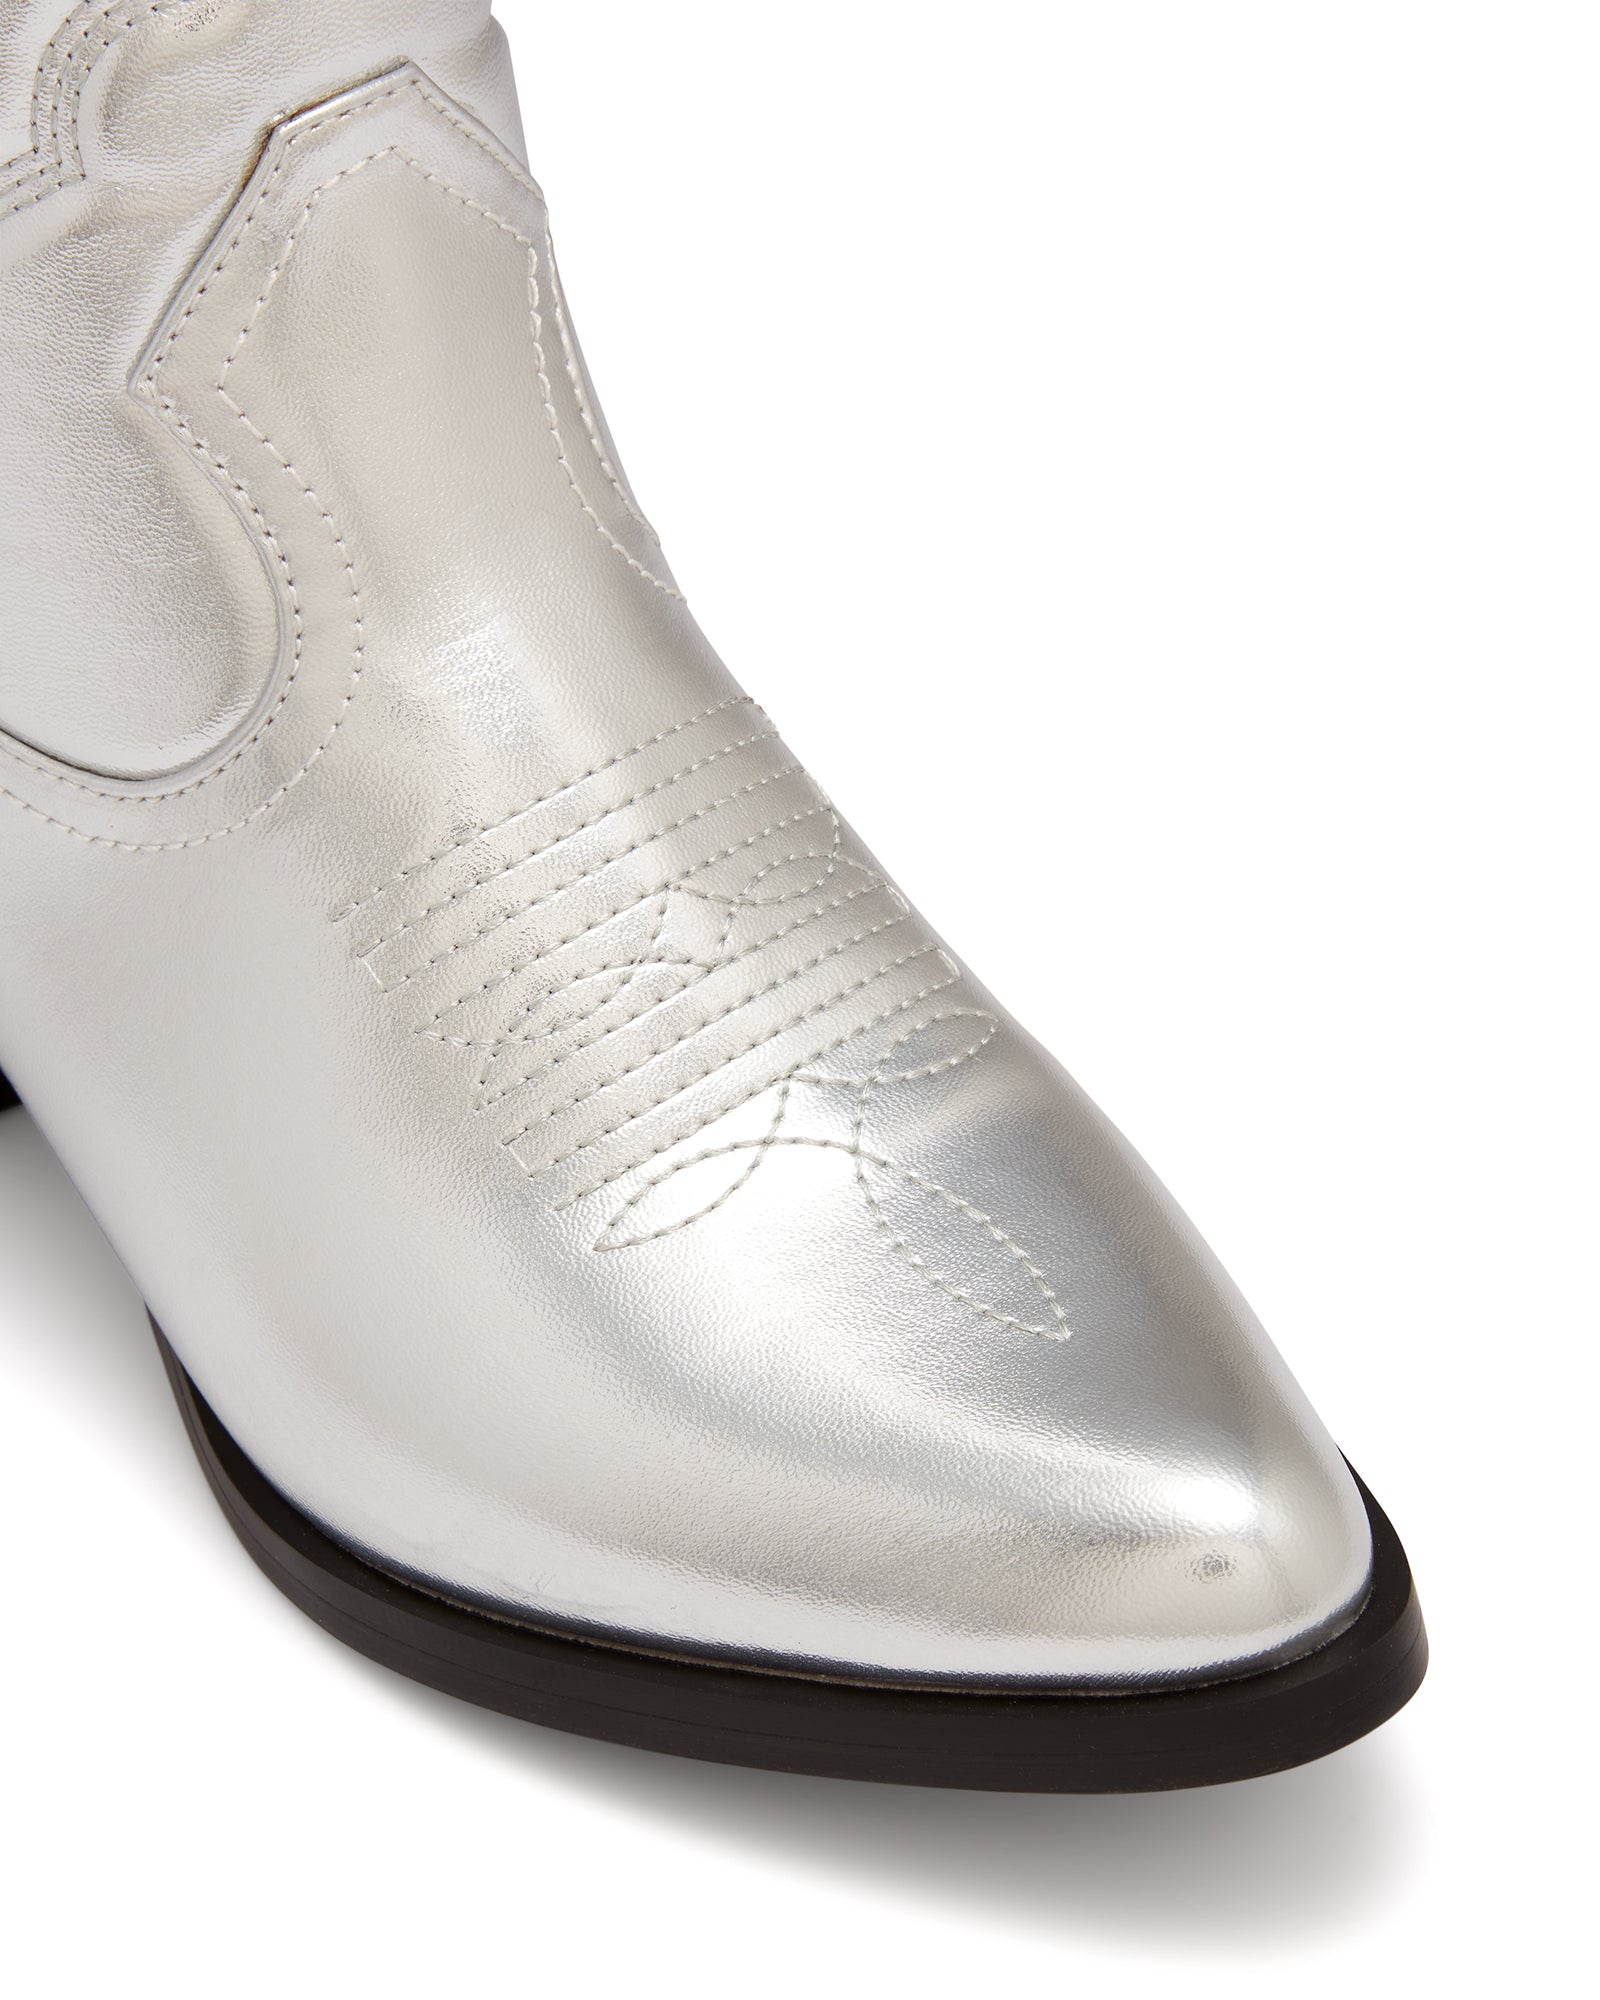 Therapy Shoes Ranger Silver | Women's Boots | Western | Cowboy | Tall